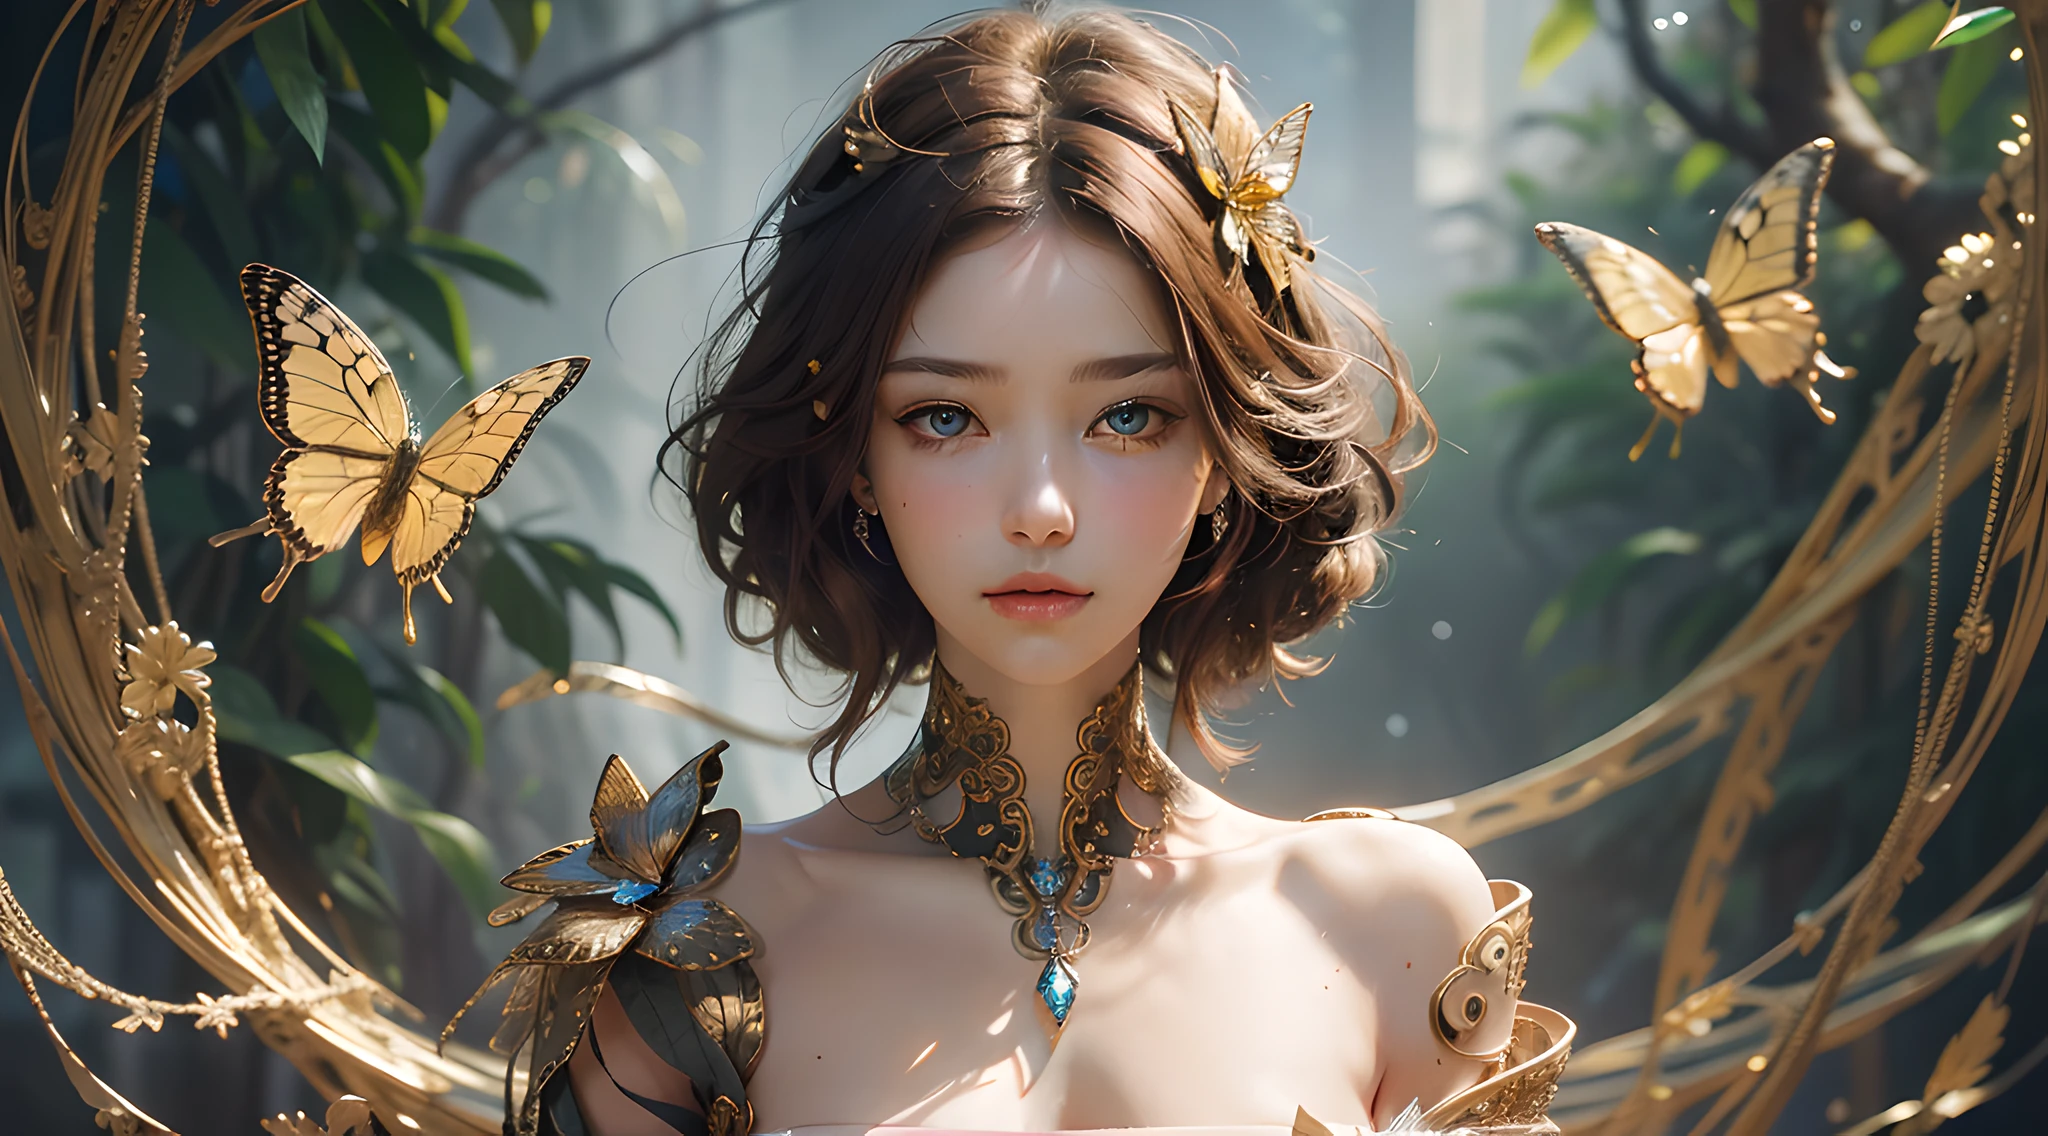 8k Portrait of a Beautiful Cyborg with Brown Hair, Bust, Upper Body, Nudity, Nudity, Sexy, Intricate, Elegant, Highly Detailed, Majestic, Digital Photography, Surrealist Painting Golden Butterfly Filigree, Broken Glass, (Masterpiece, Side Light, Delicate Beautiful Eyes: 1.2 ), Human Development Report,